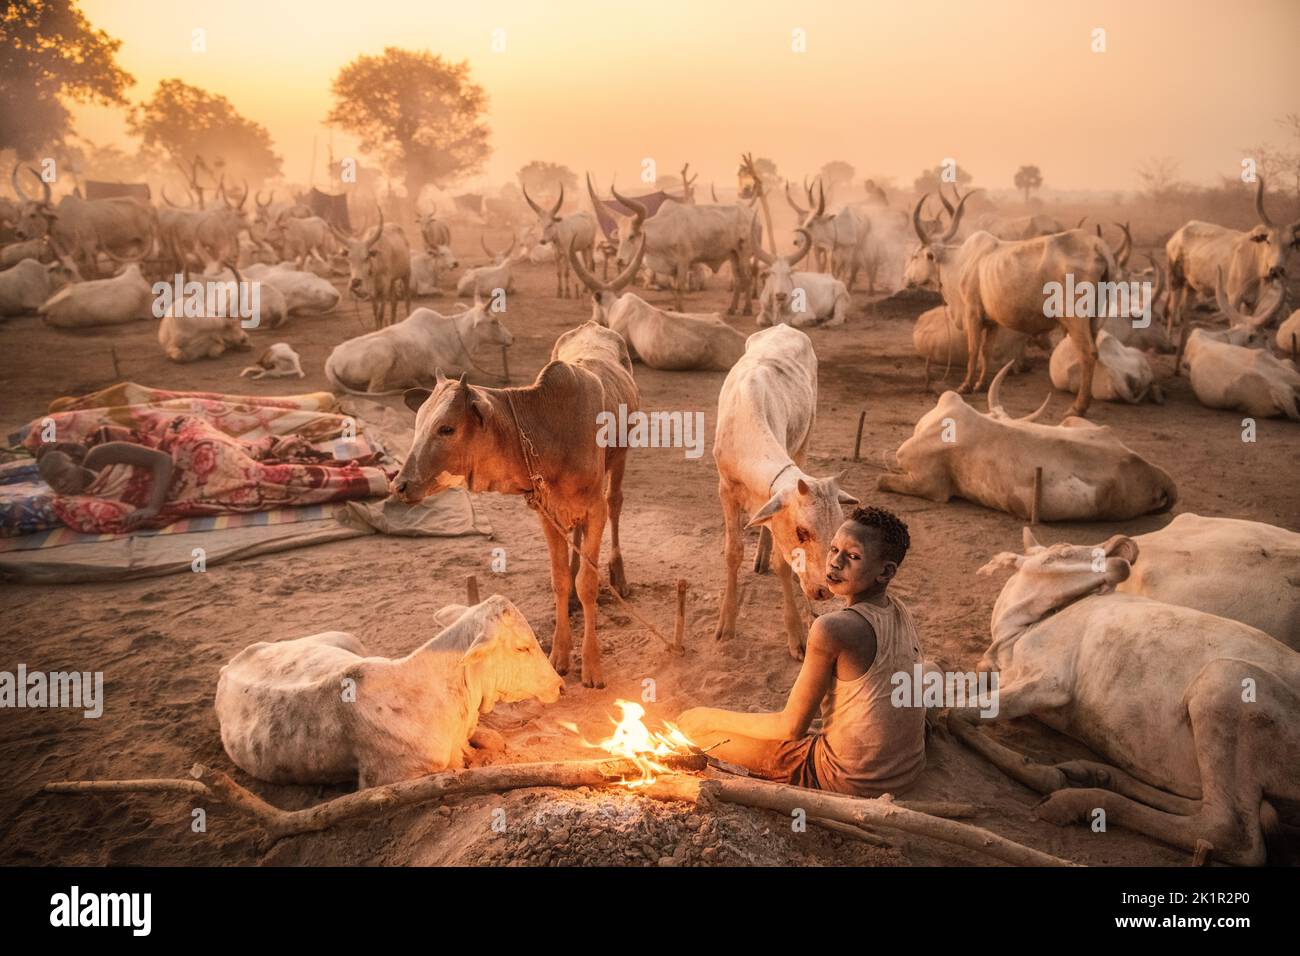 An abundance of cattle. South Sudan: THESE STUNNING images show the incredible bond between the Mundari people and their cattle in South Sudan. One im Stock Photo